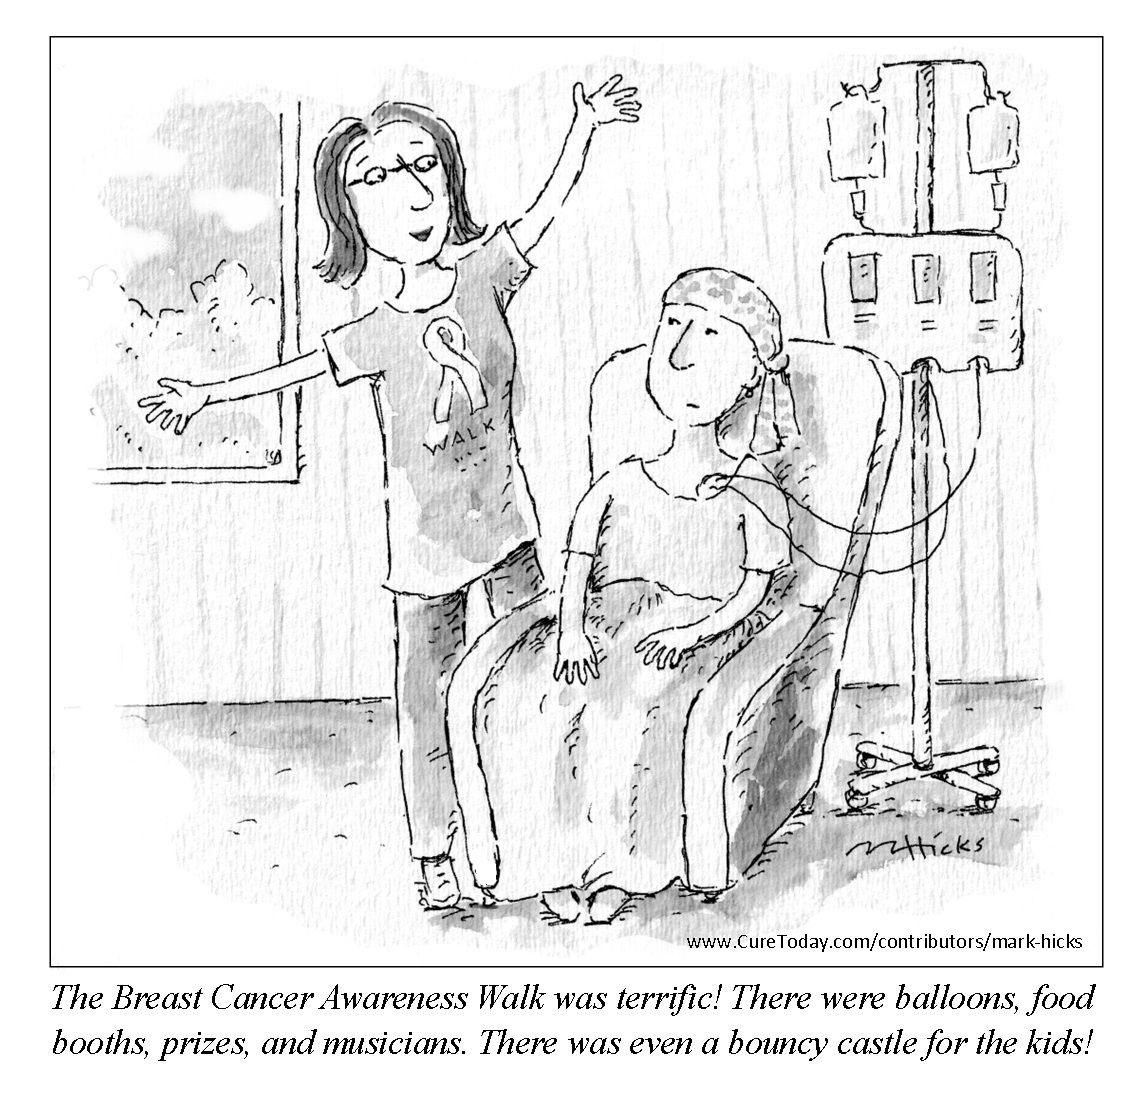 Cartoon of a woman with a breast cancer ribbon shirt talking to an unamused woman hooked up to an IV machine.